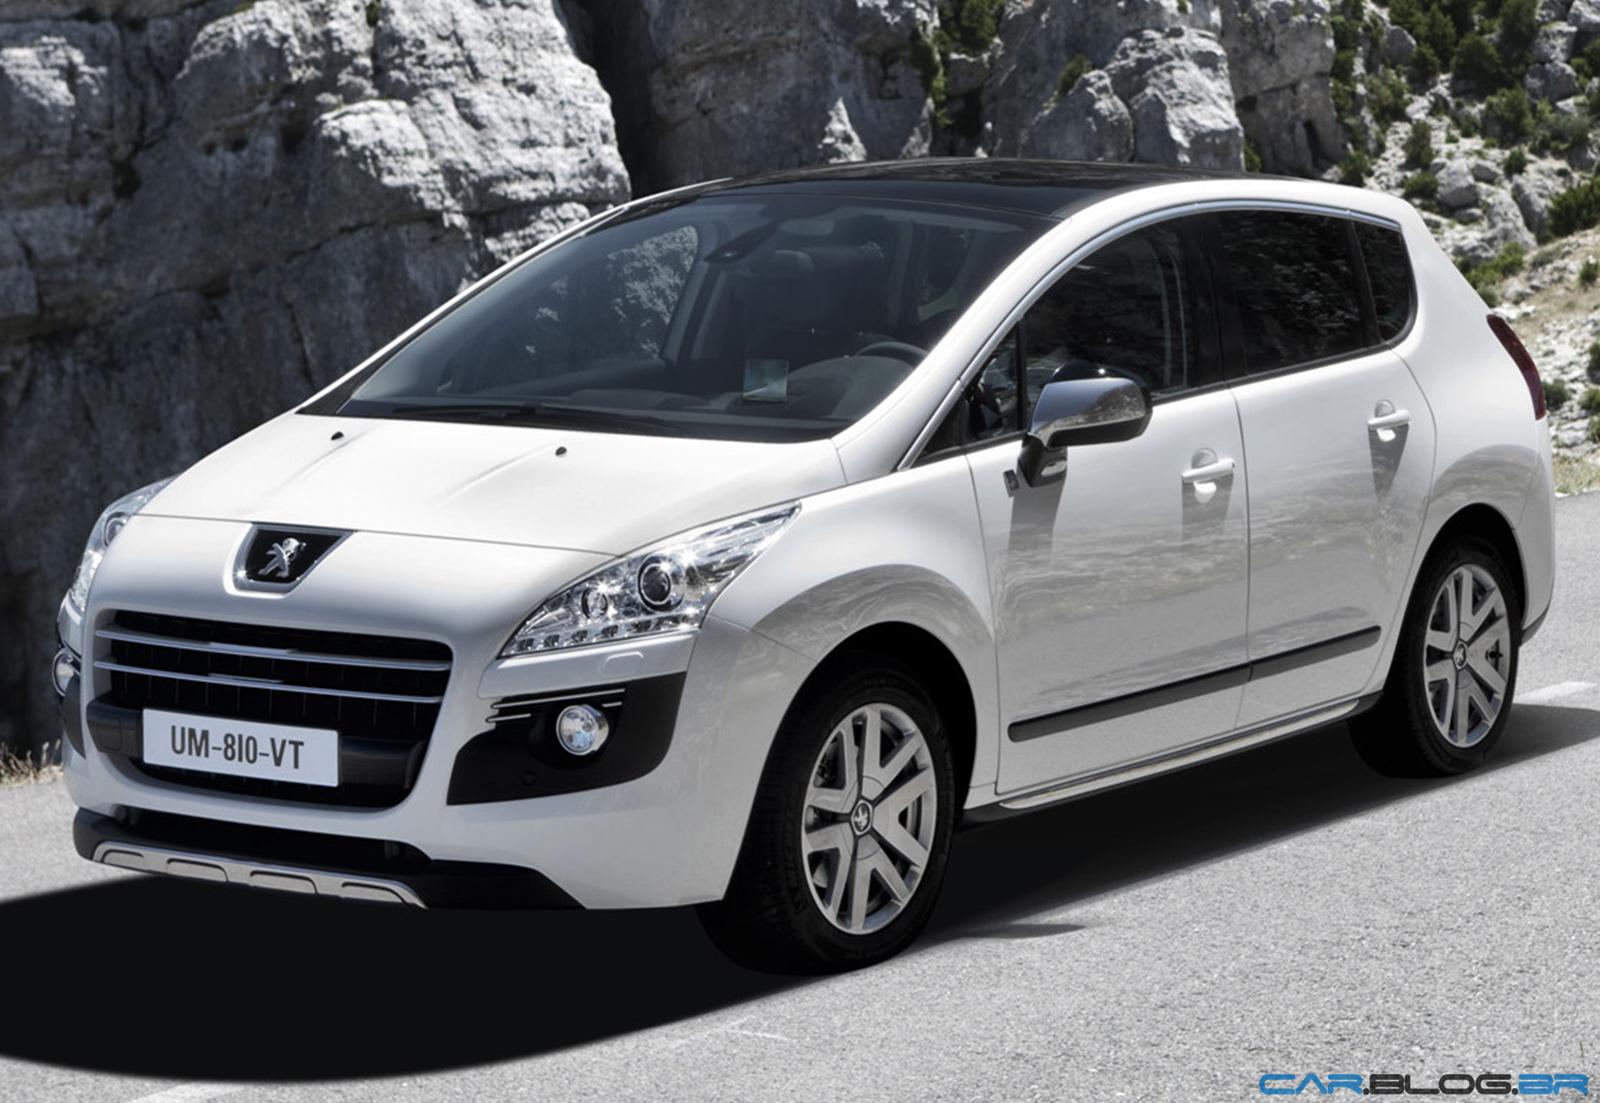 Peugeot 3008 2013 Review, Amazing Pictures and Images